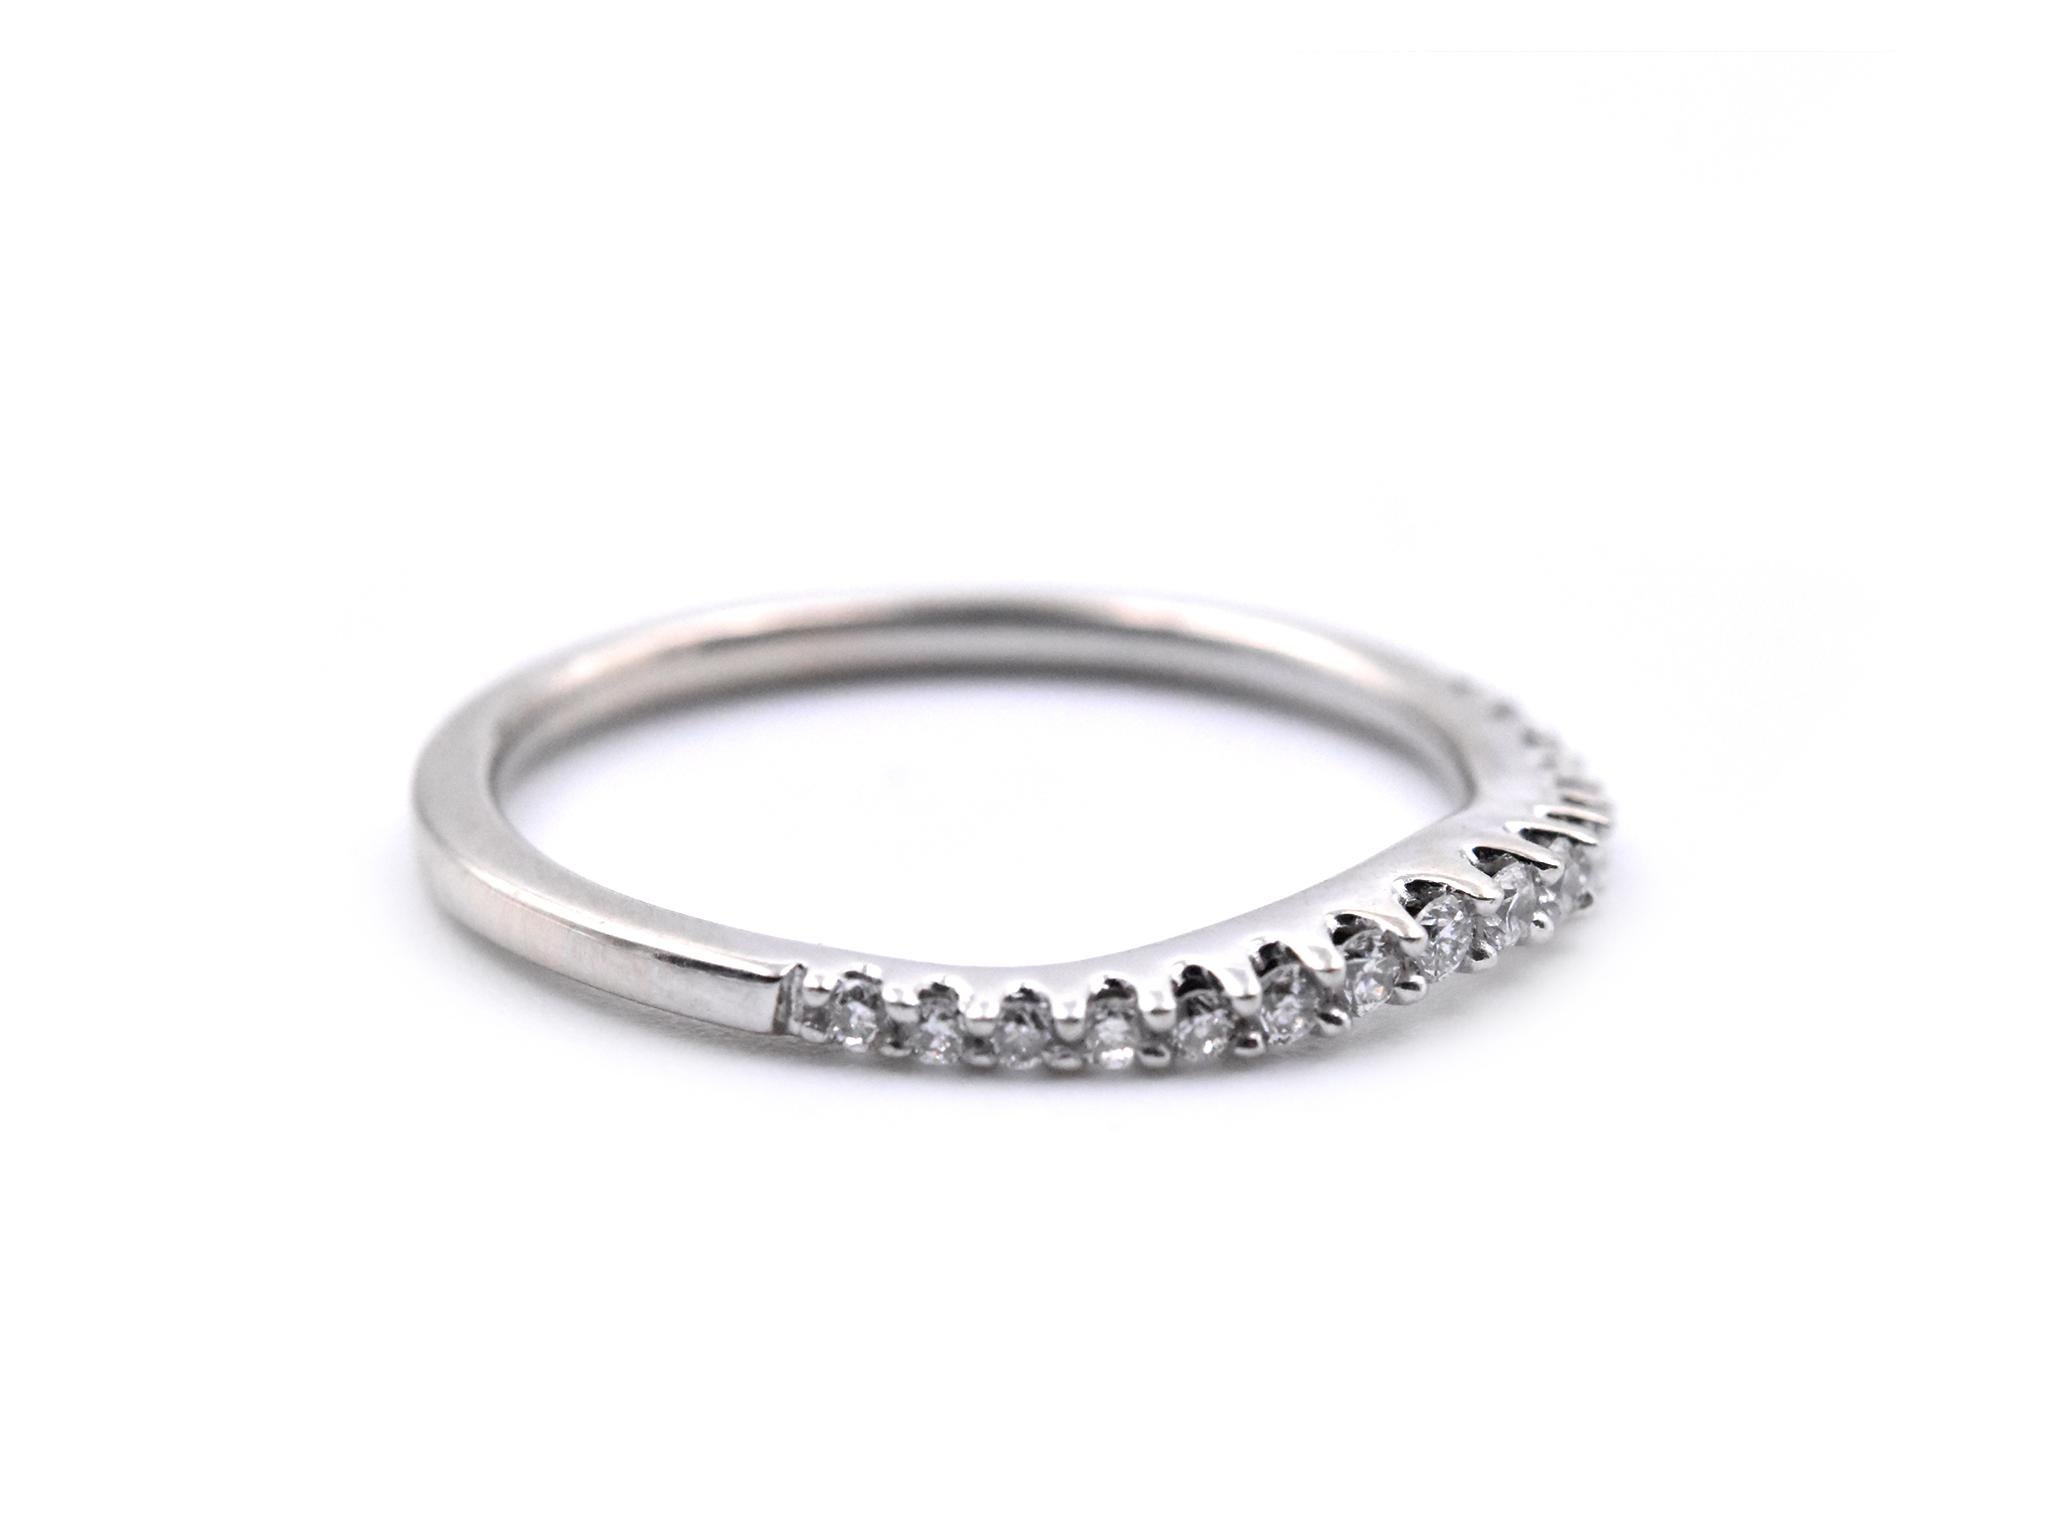 Designer: custom 
Material: 14k white gold
Diamonds: 17 round brilliant cuts = 0.17cttw
Size: 5 ½ (please allow two additional shipping days for sizing requests)  
Dimensions: ring measures 1.40mm in width
Weight: 1.41 grams

